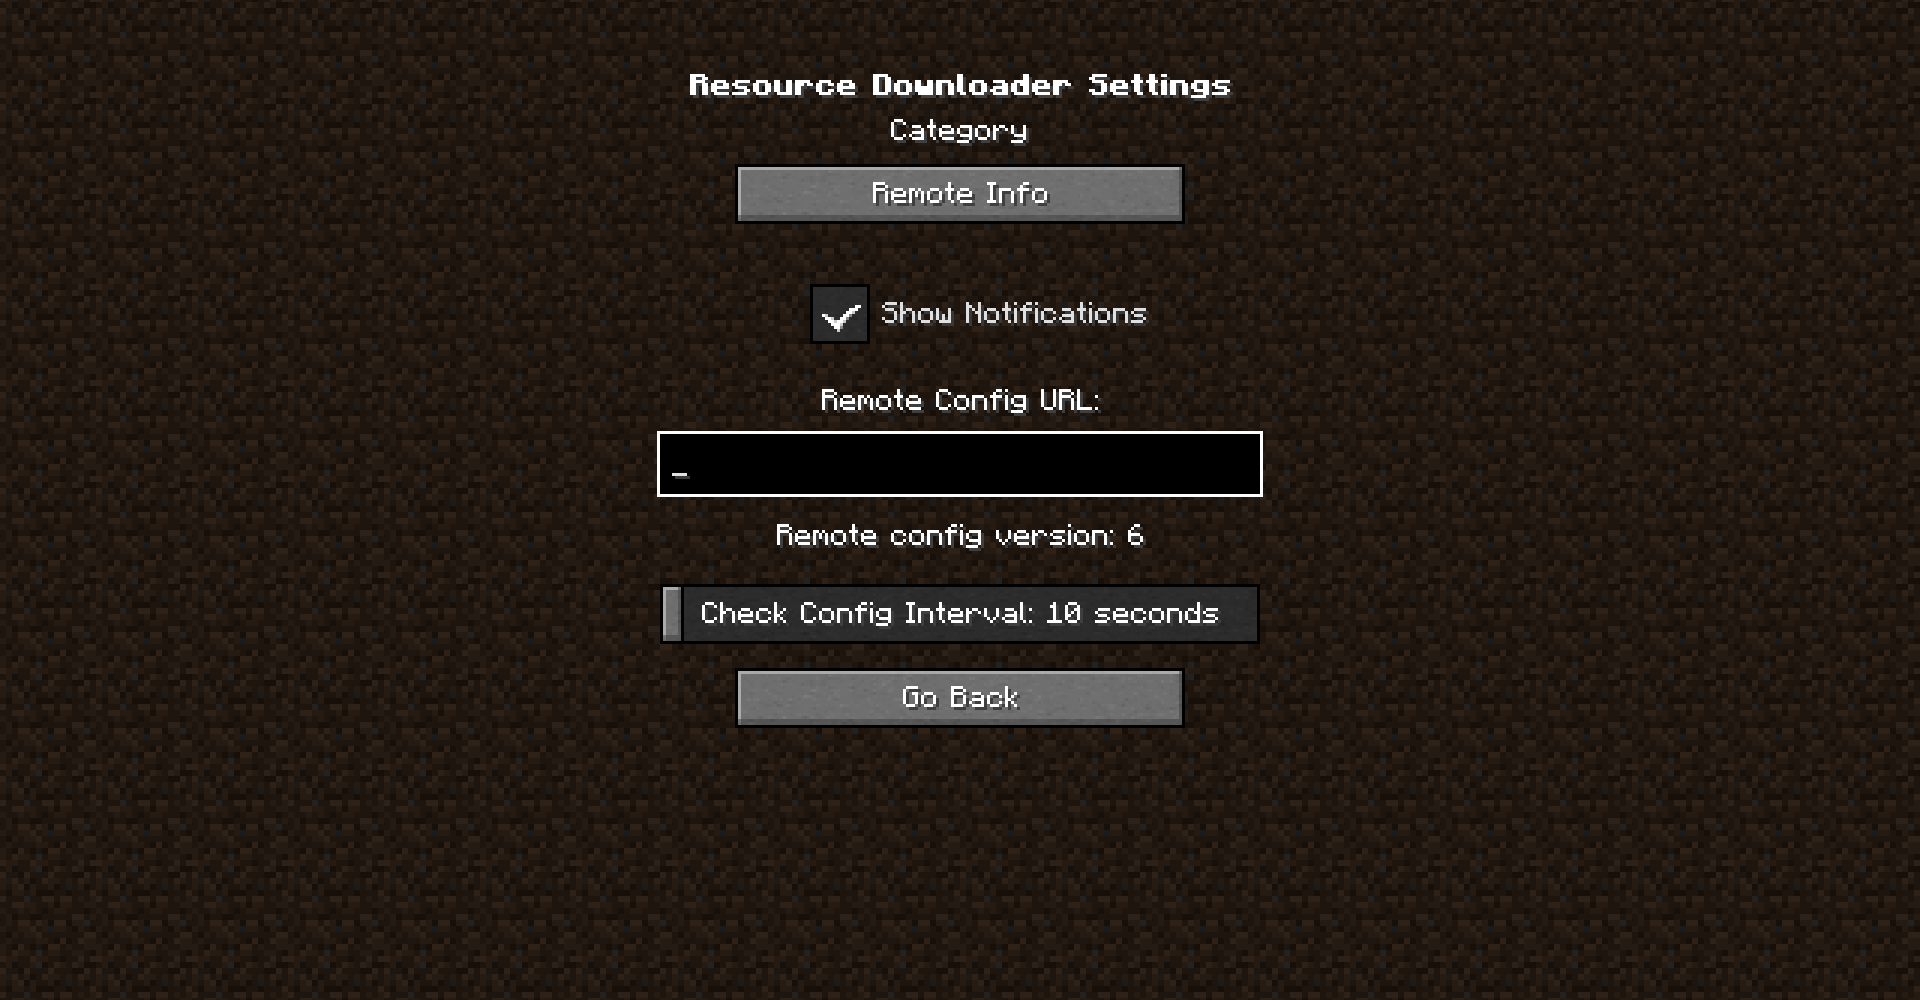 Resource Downloader Settings - Remote Info